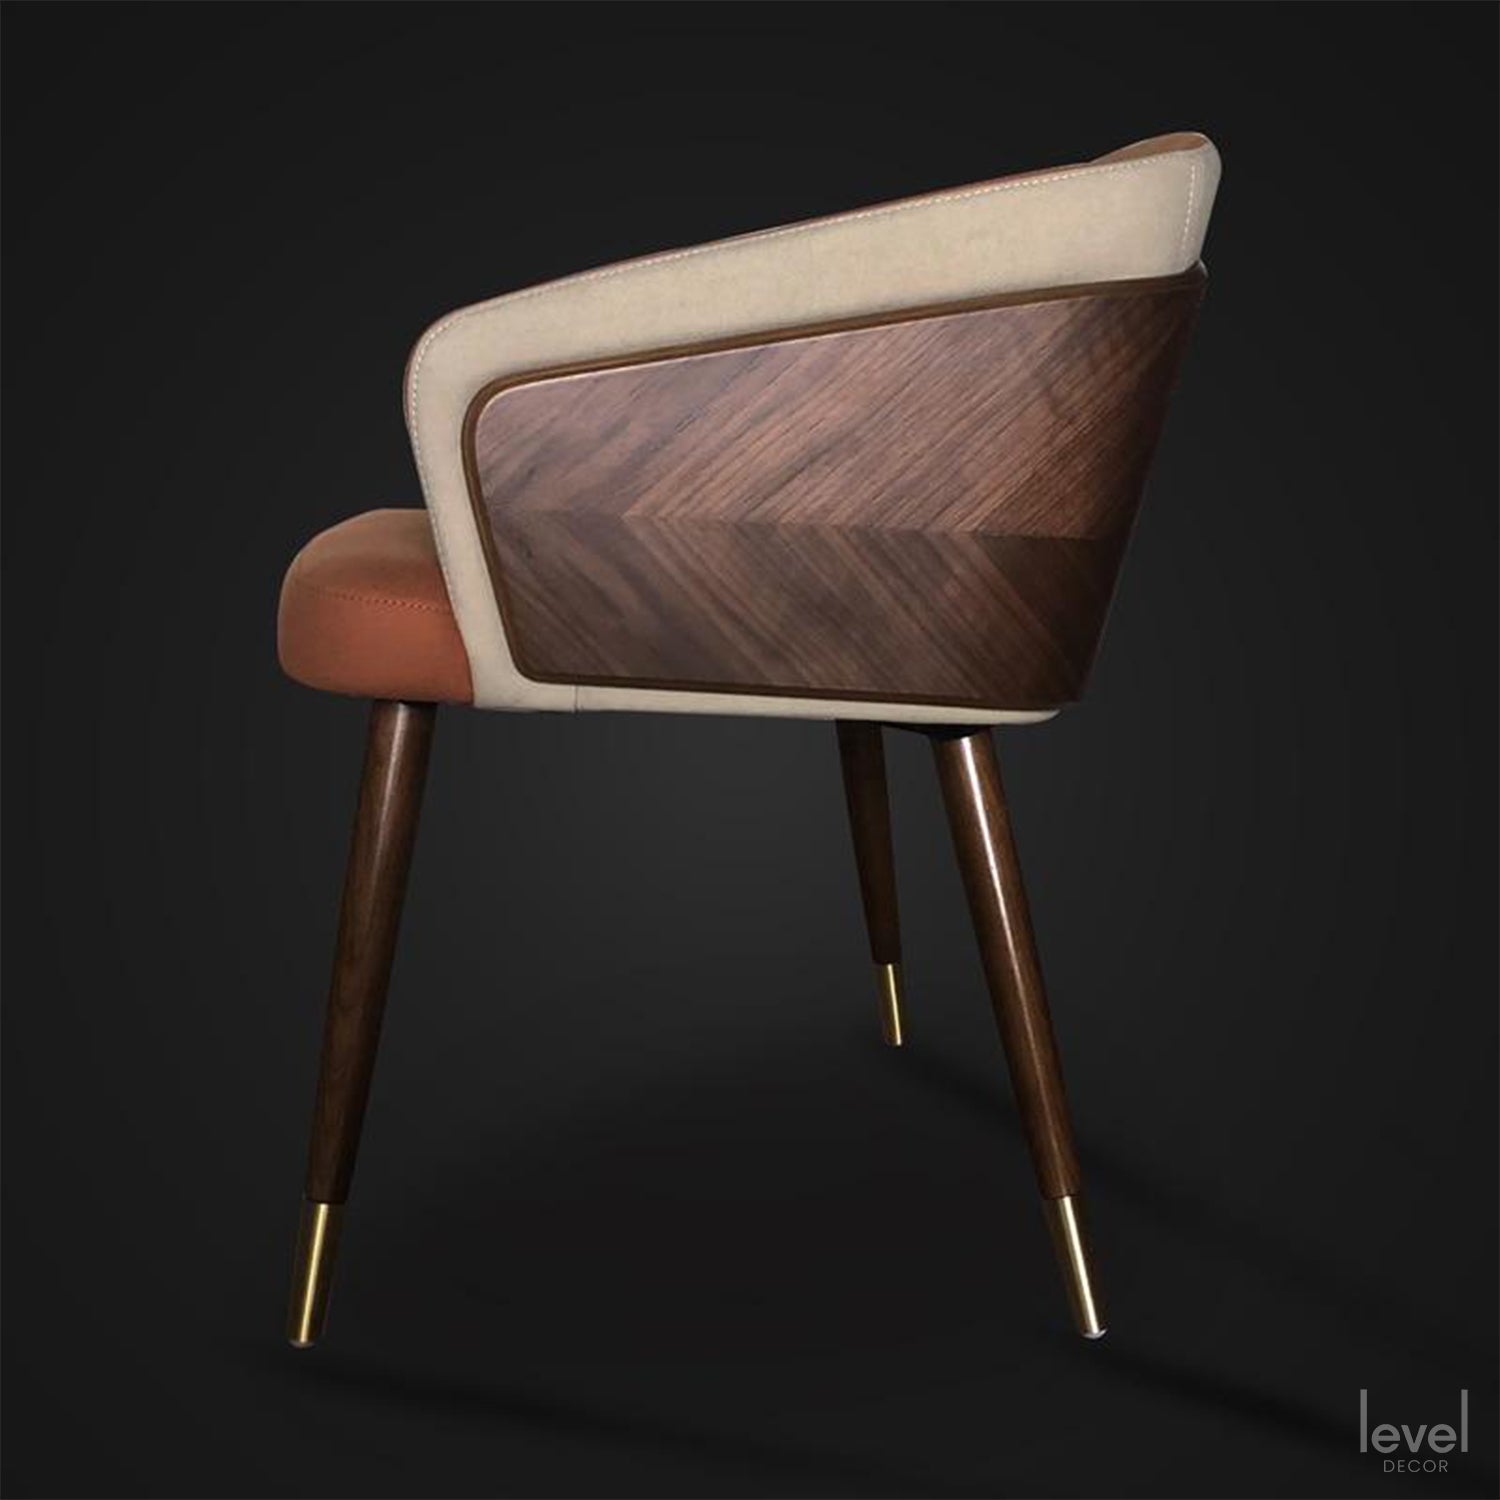 Modern Solid Wood Leisure Chairs - Level Decor